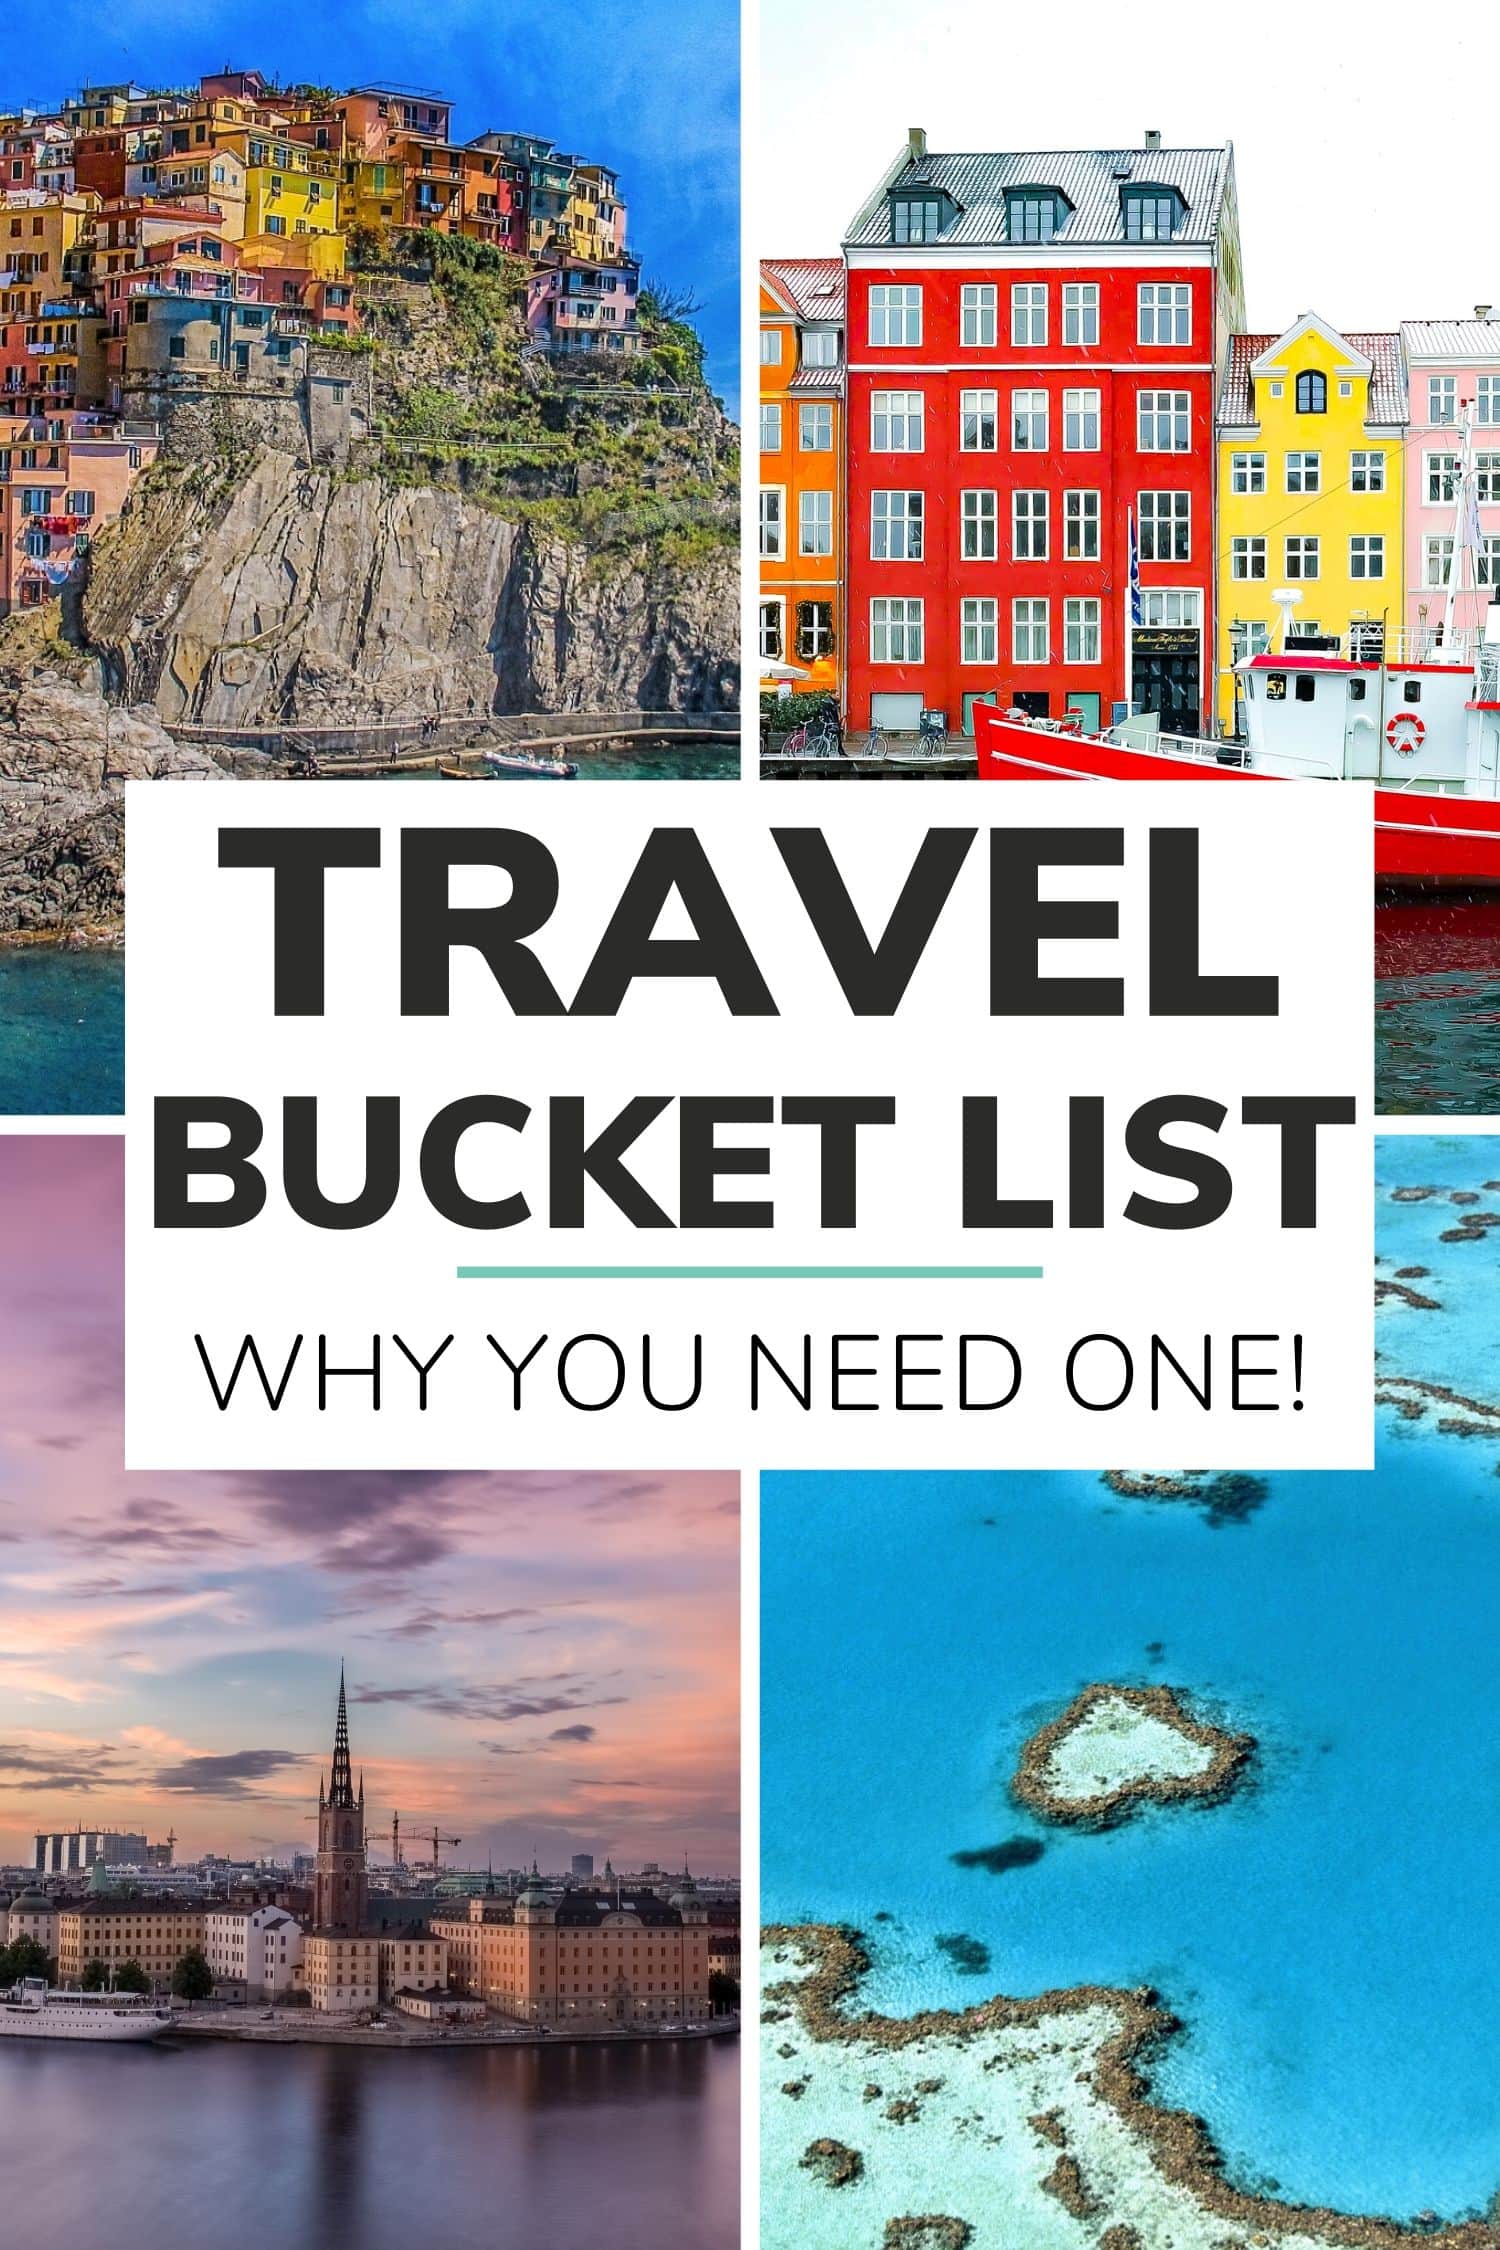 Collage of pictures from Italy, Scandinavia and Australia with text overlay that says "Travel Bucket List: Why You Need One!"